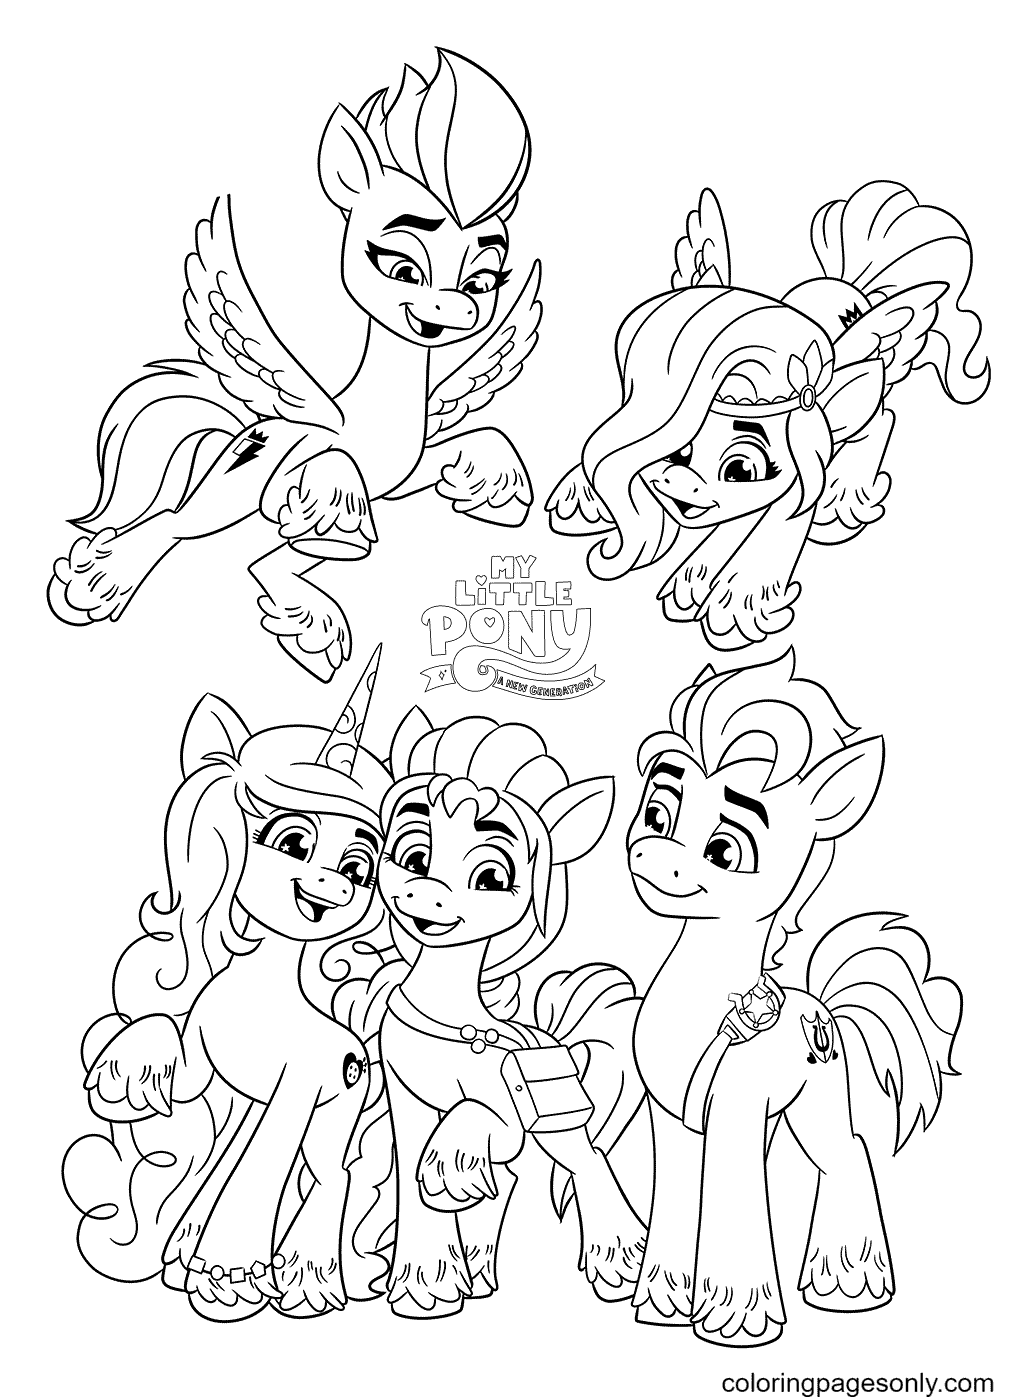 My Little Pony A New Generation movie Coloring Pages